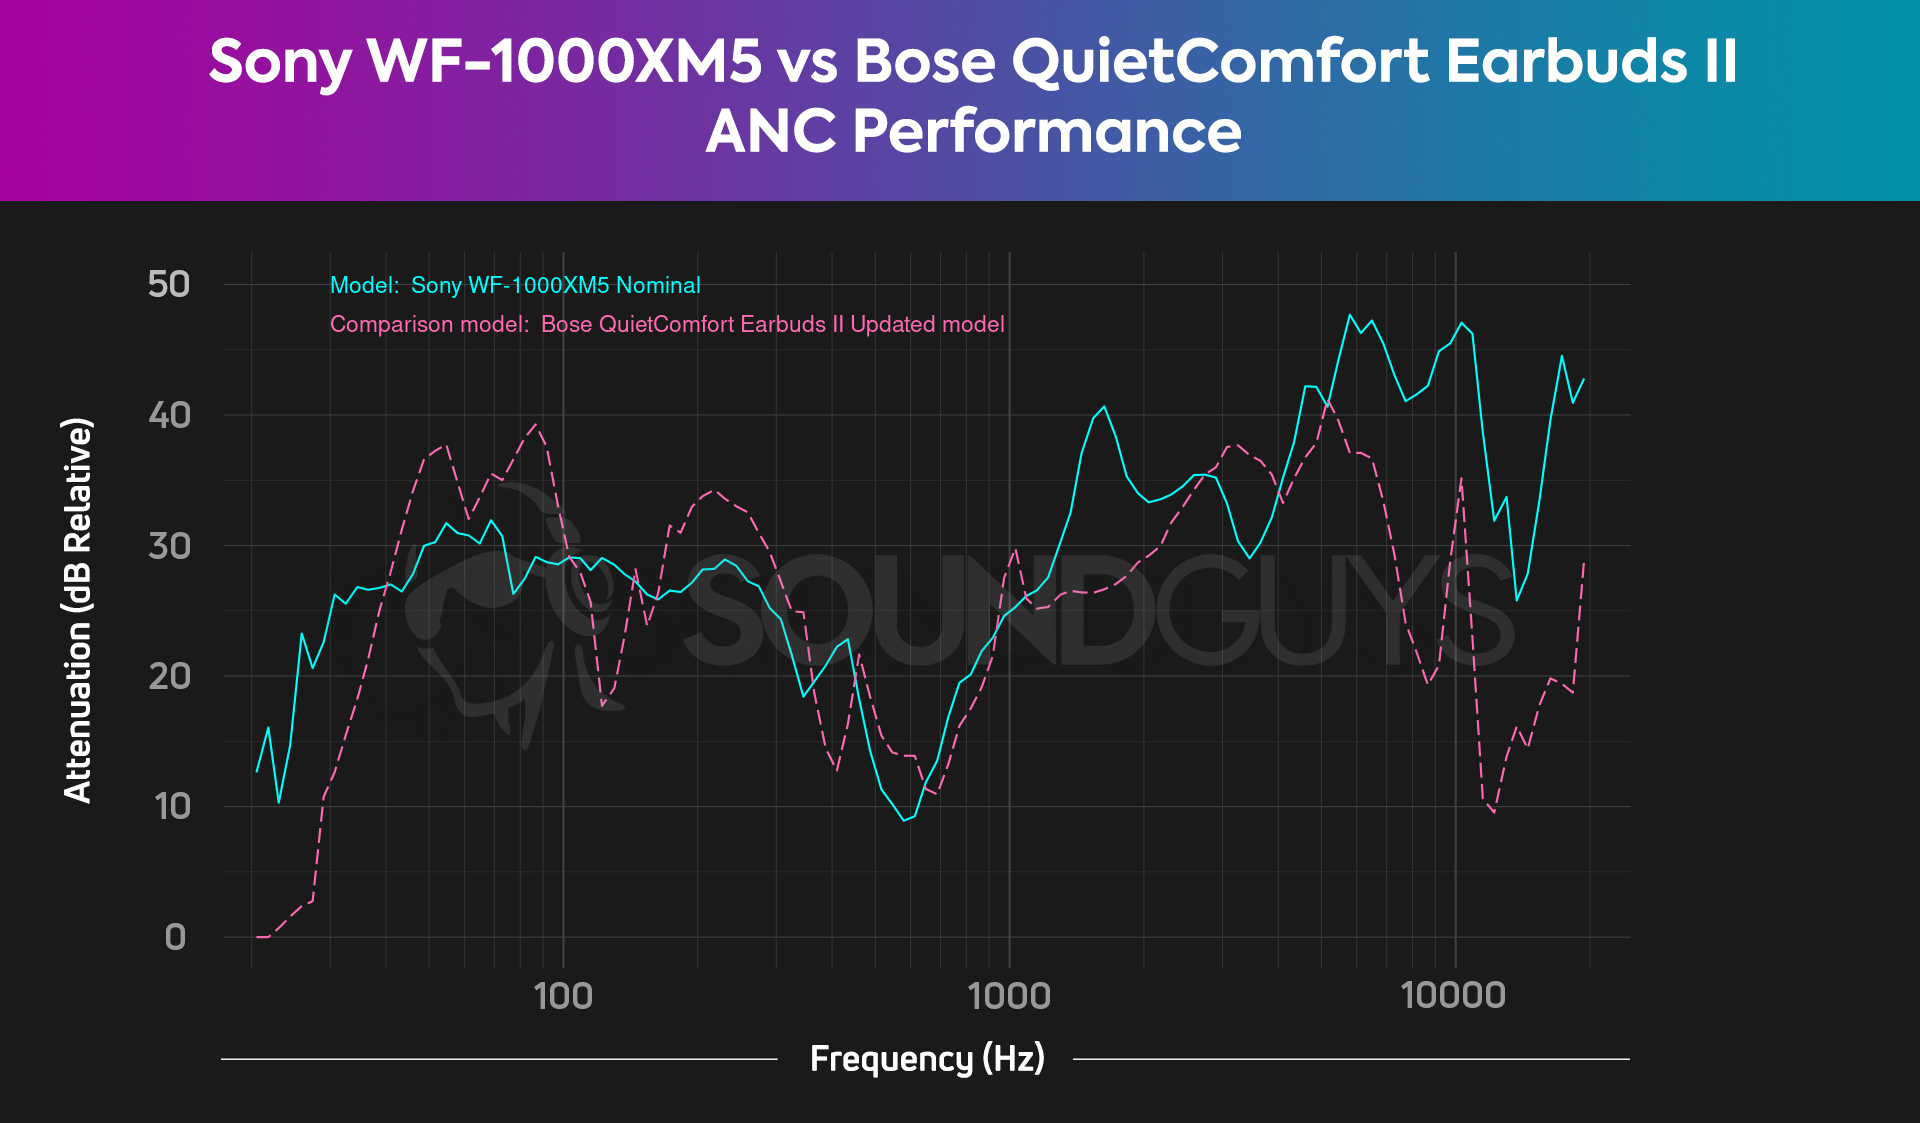 A comparison of the ANC performance between the Sony WF-1000XM5 and the Bose QuietComfort Earbuds II showing them being fairly close in performance.